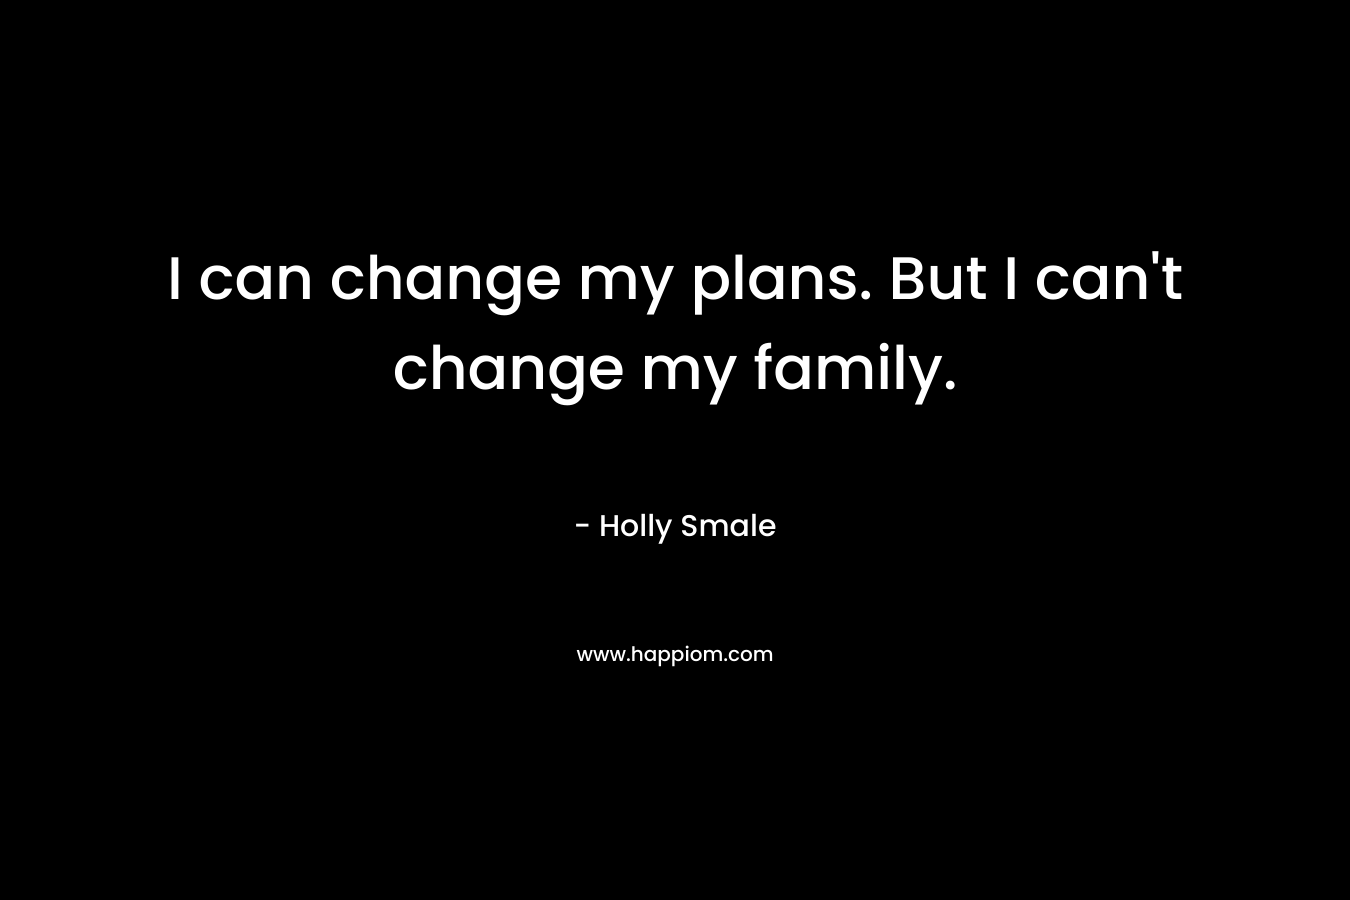 I can change my plans. But I can't change my family.